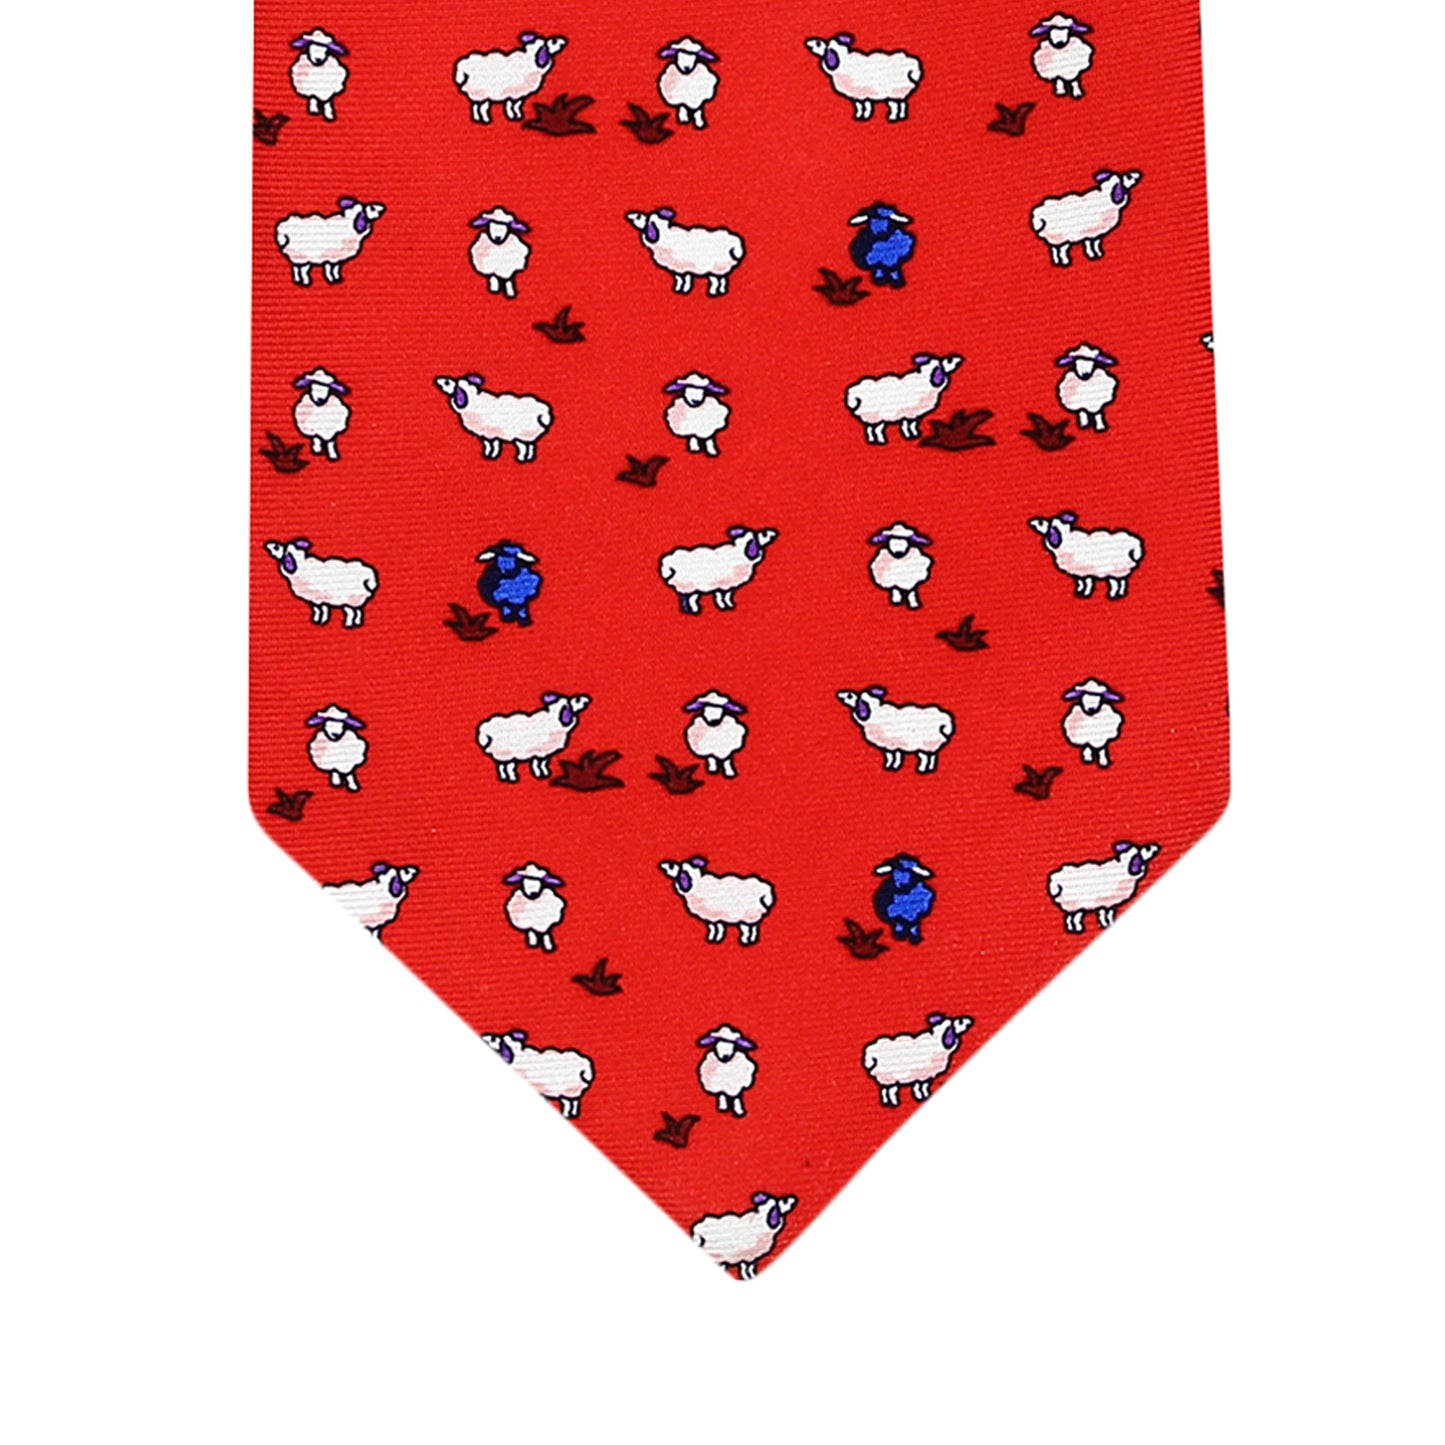 Sheep in Red